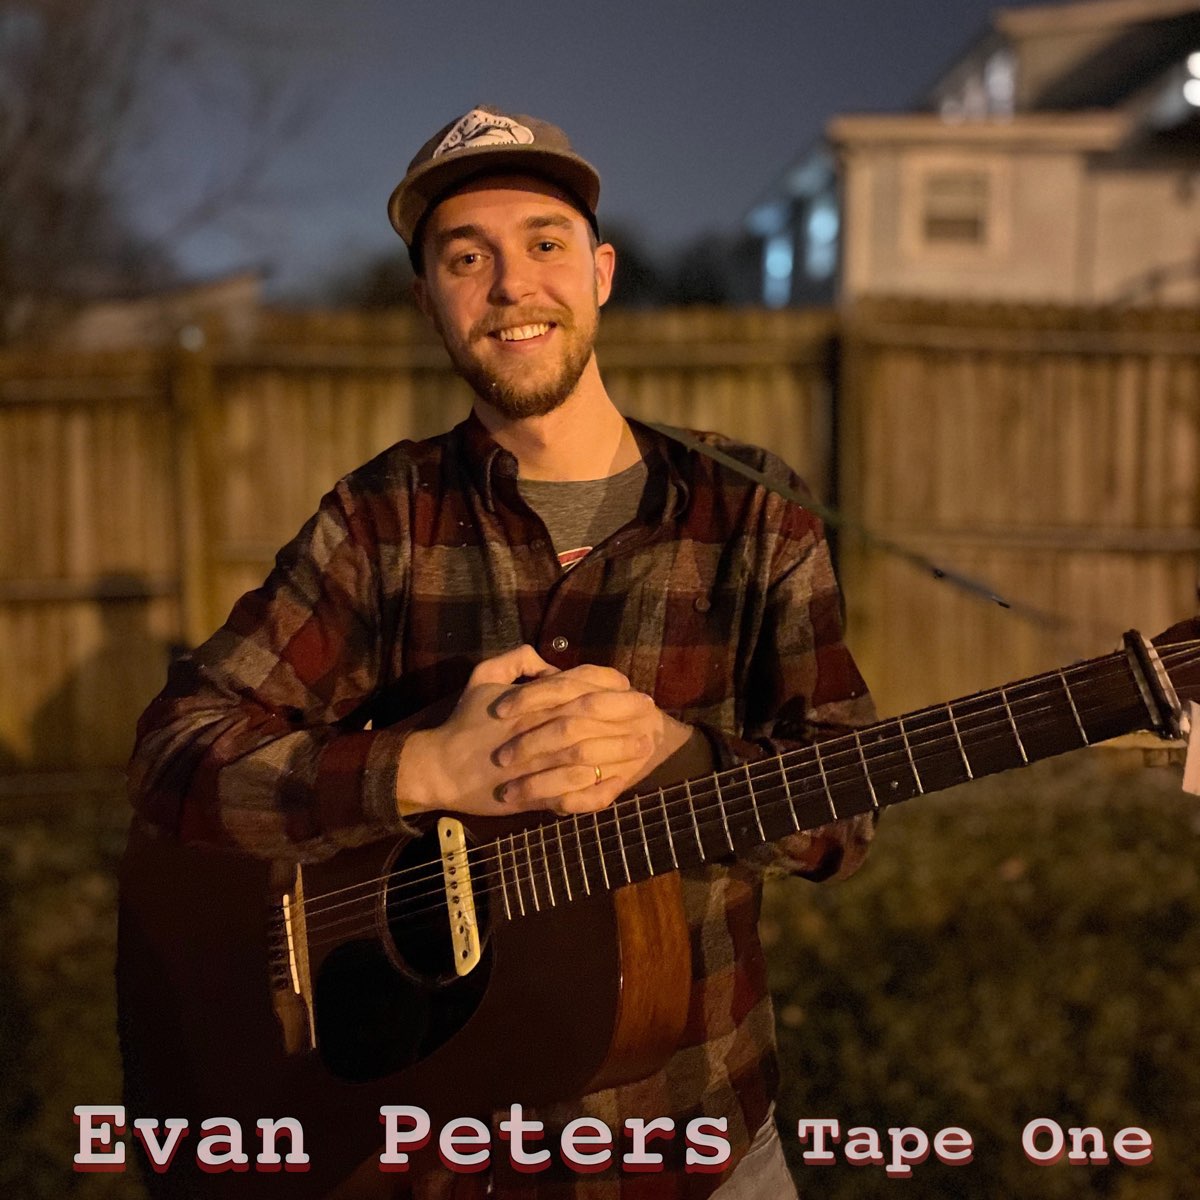 Tape One - EP by Evan Peters on Apple Music